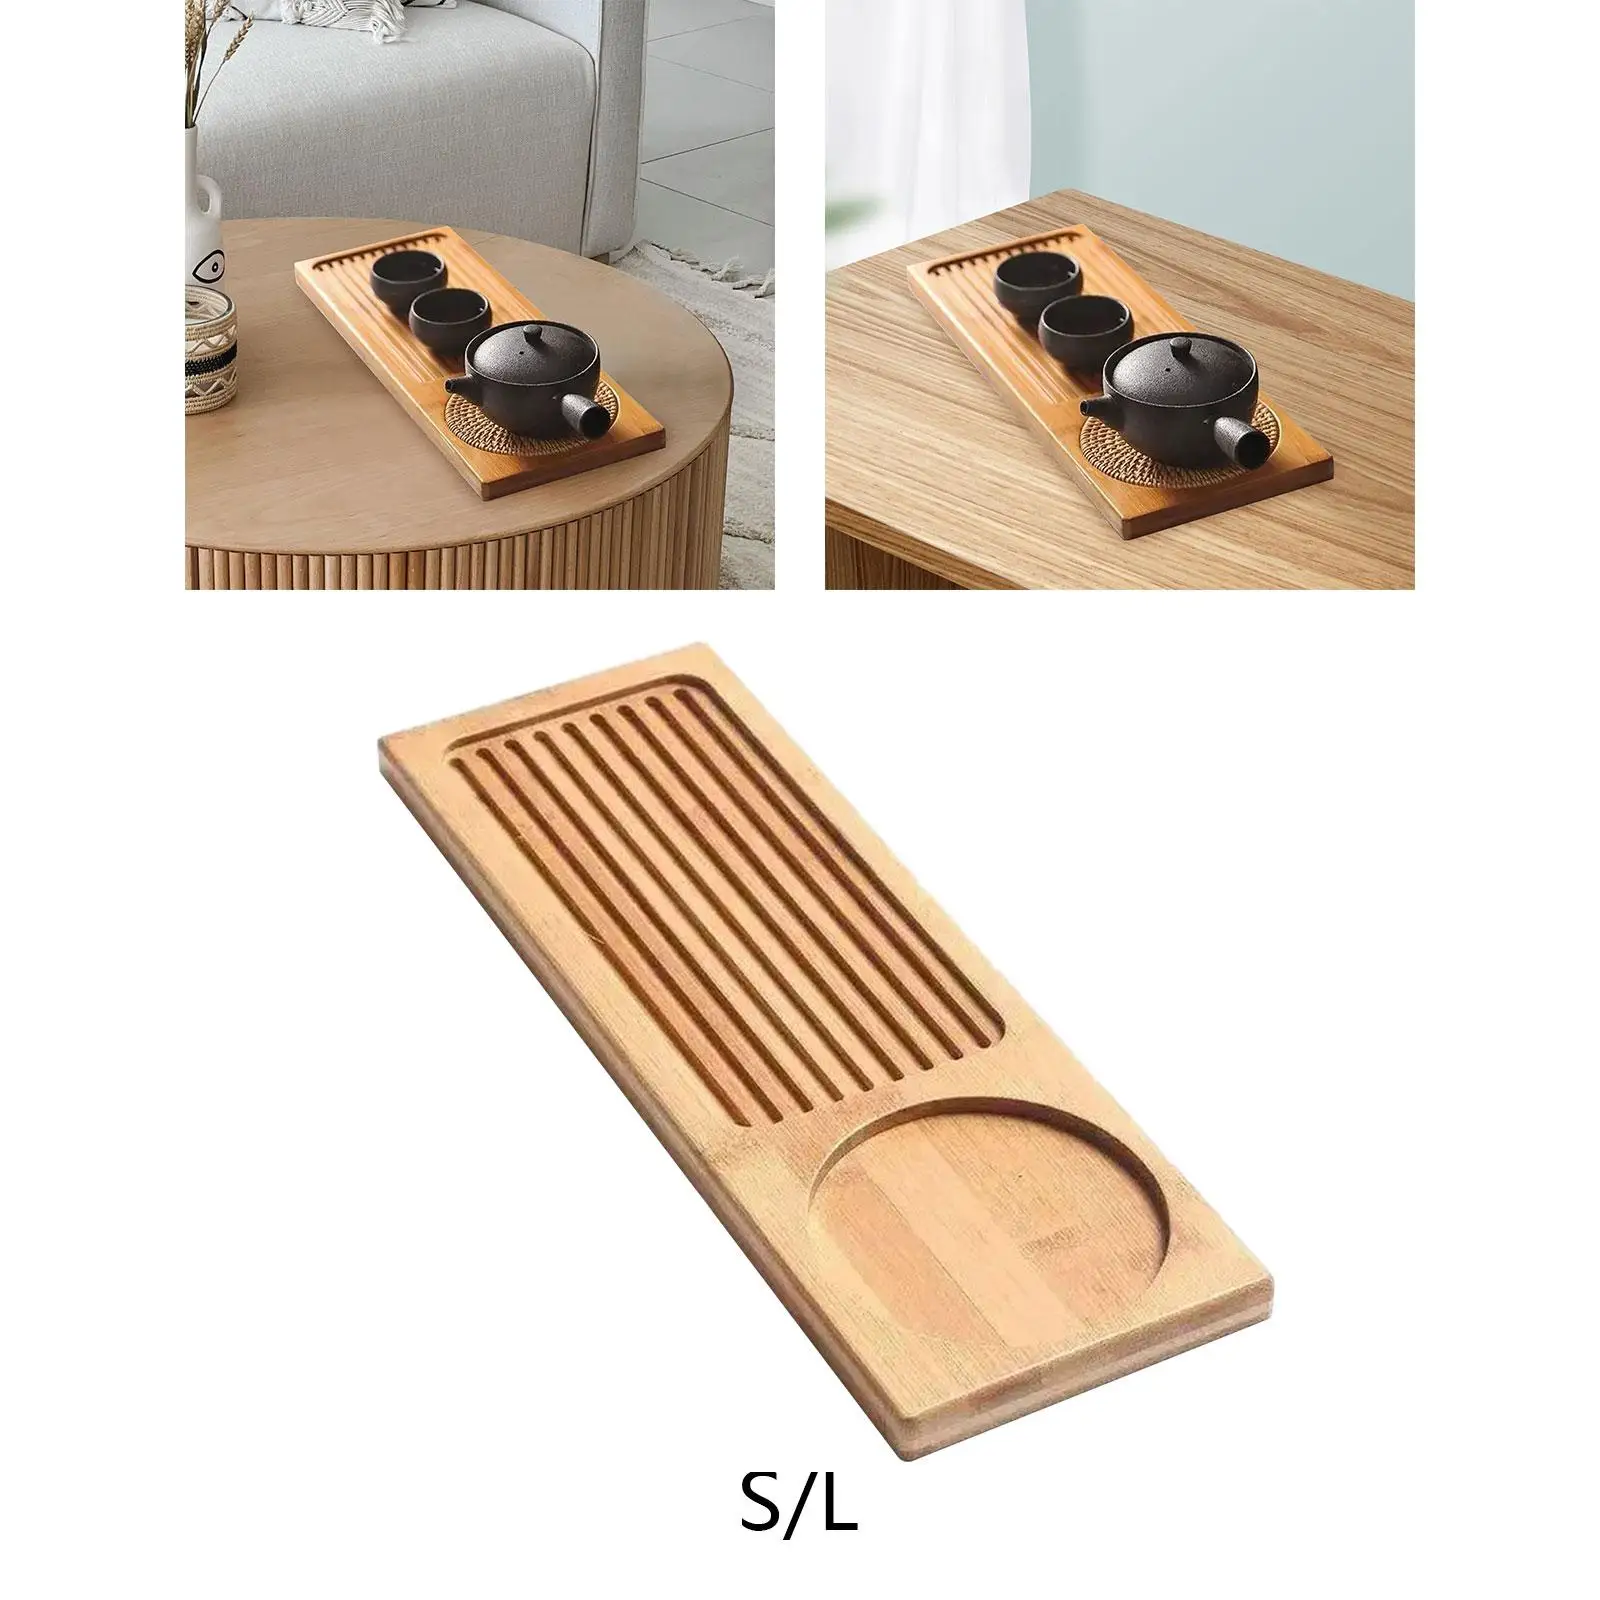 Bamboo Tea Tray Rustic Decoration Simple Easy to Clean for Tea Lover Tea Accessory Bamboo Chinese Tea Tray Tea Serving Tray